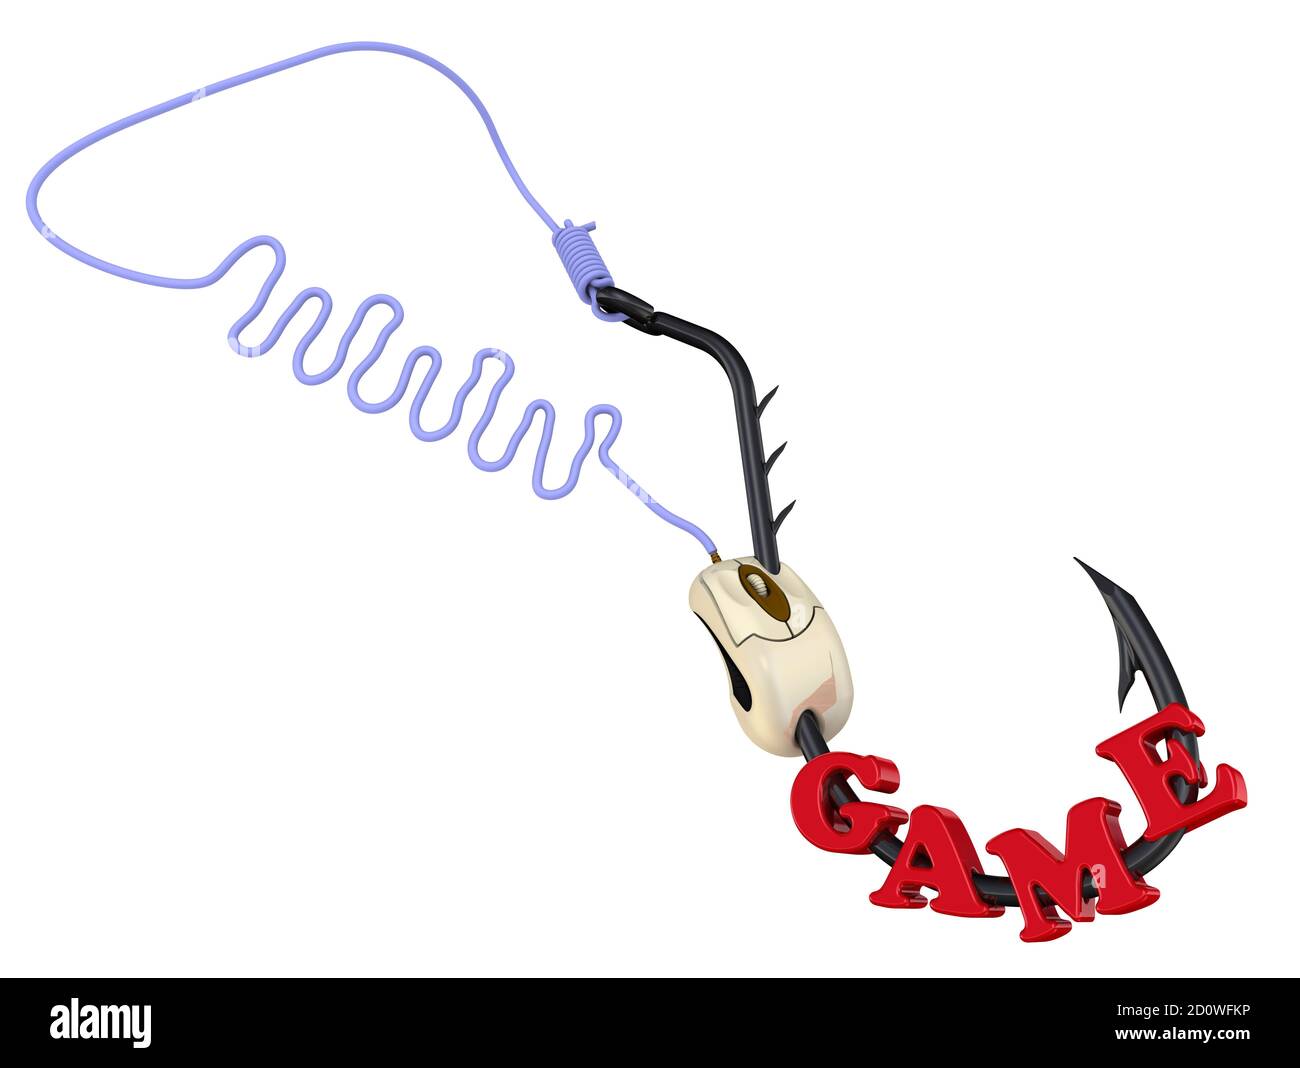 https://c8.alamy.com/comp/2D0WFKP/fishing-line-with-the-acronym-www-red-word-game-and-computer-mouse-strung-on-a-fishing-hook-the-dependence-on-network-games-the-concept-2D0WFKP.jpg